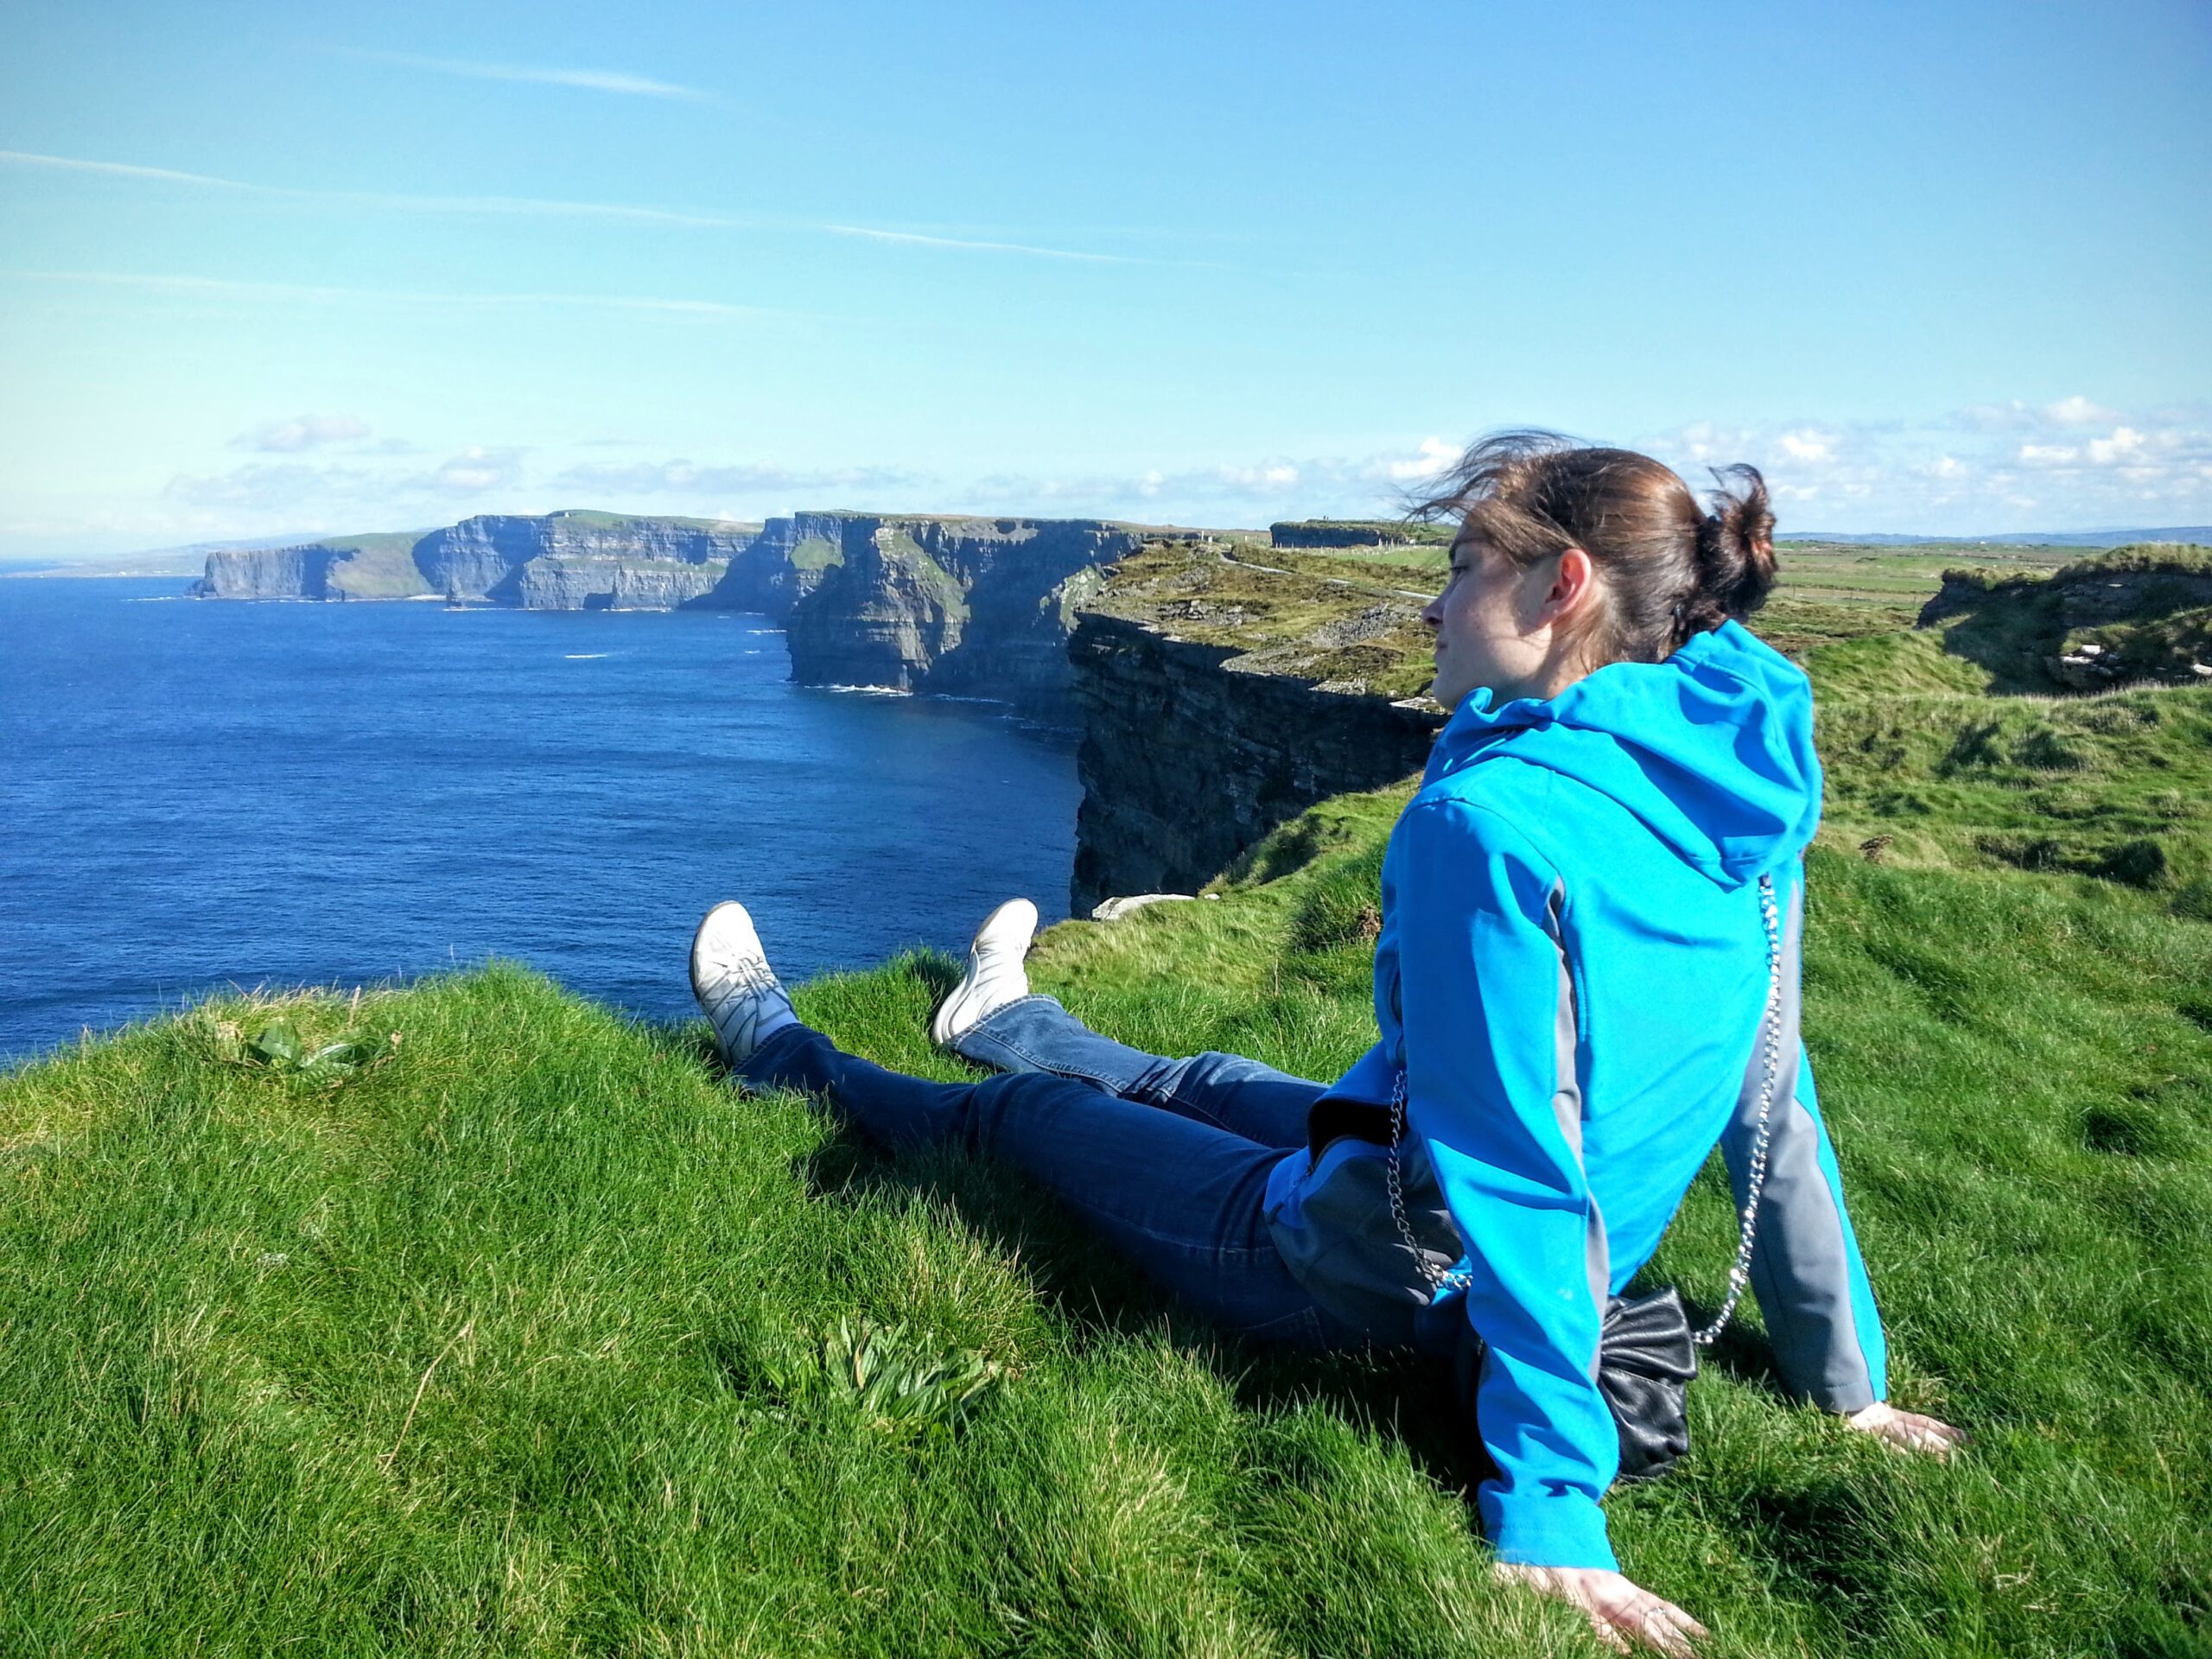 Boise travel agent, Jen Lowry, sits on the grass overlooking the Cliffs of Moher